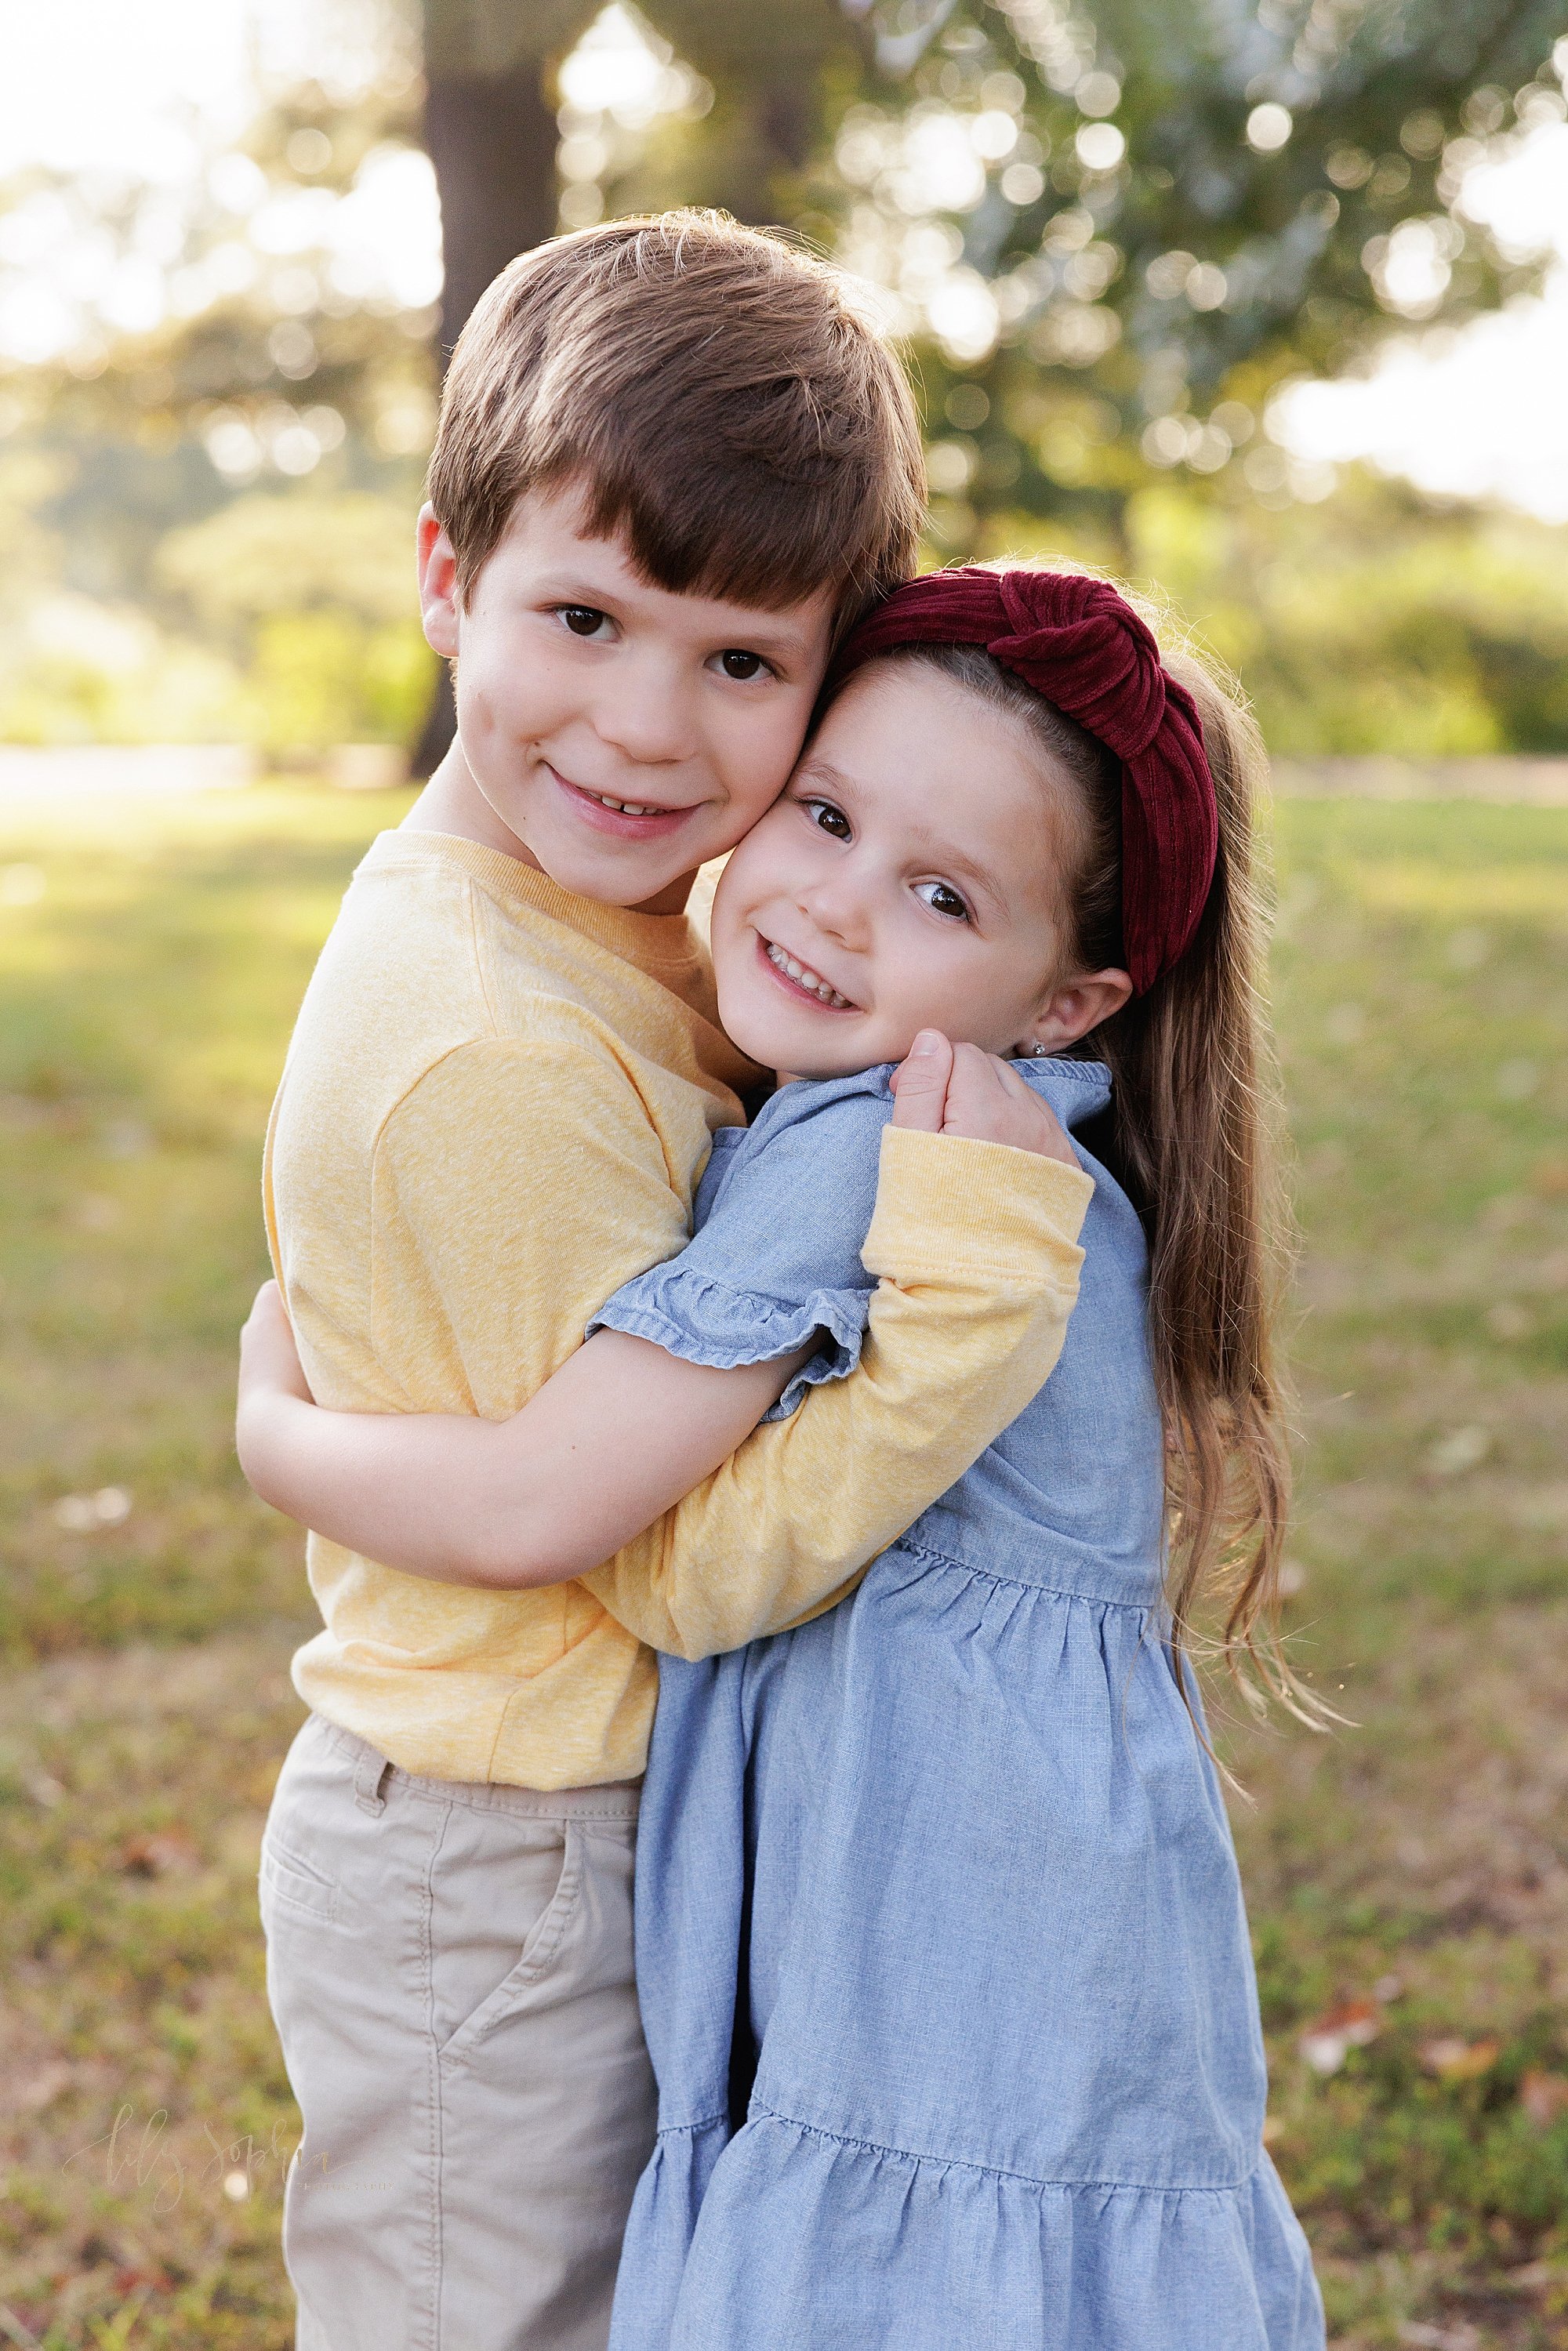 intown-atlanta-decatur-brookhaven-buckhead-outdoor-fall-pictures-family-photoshoot_5526.jpg